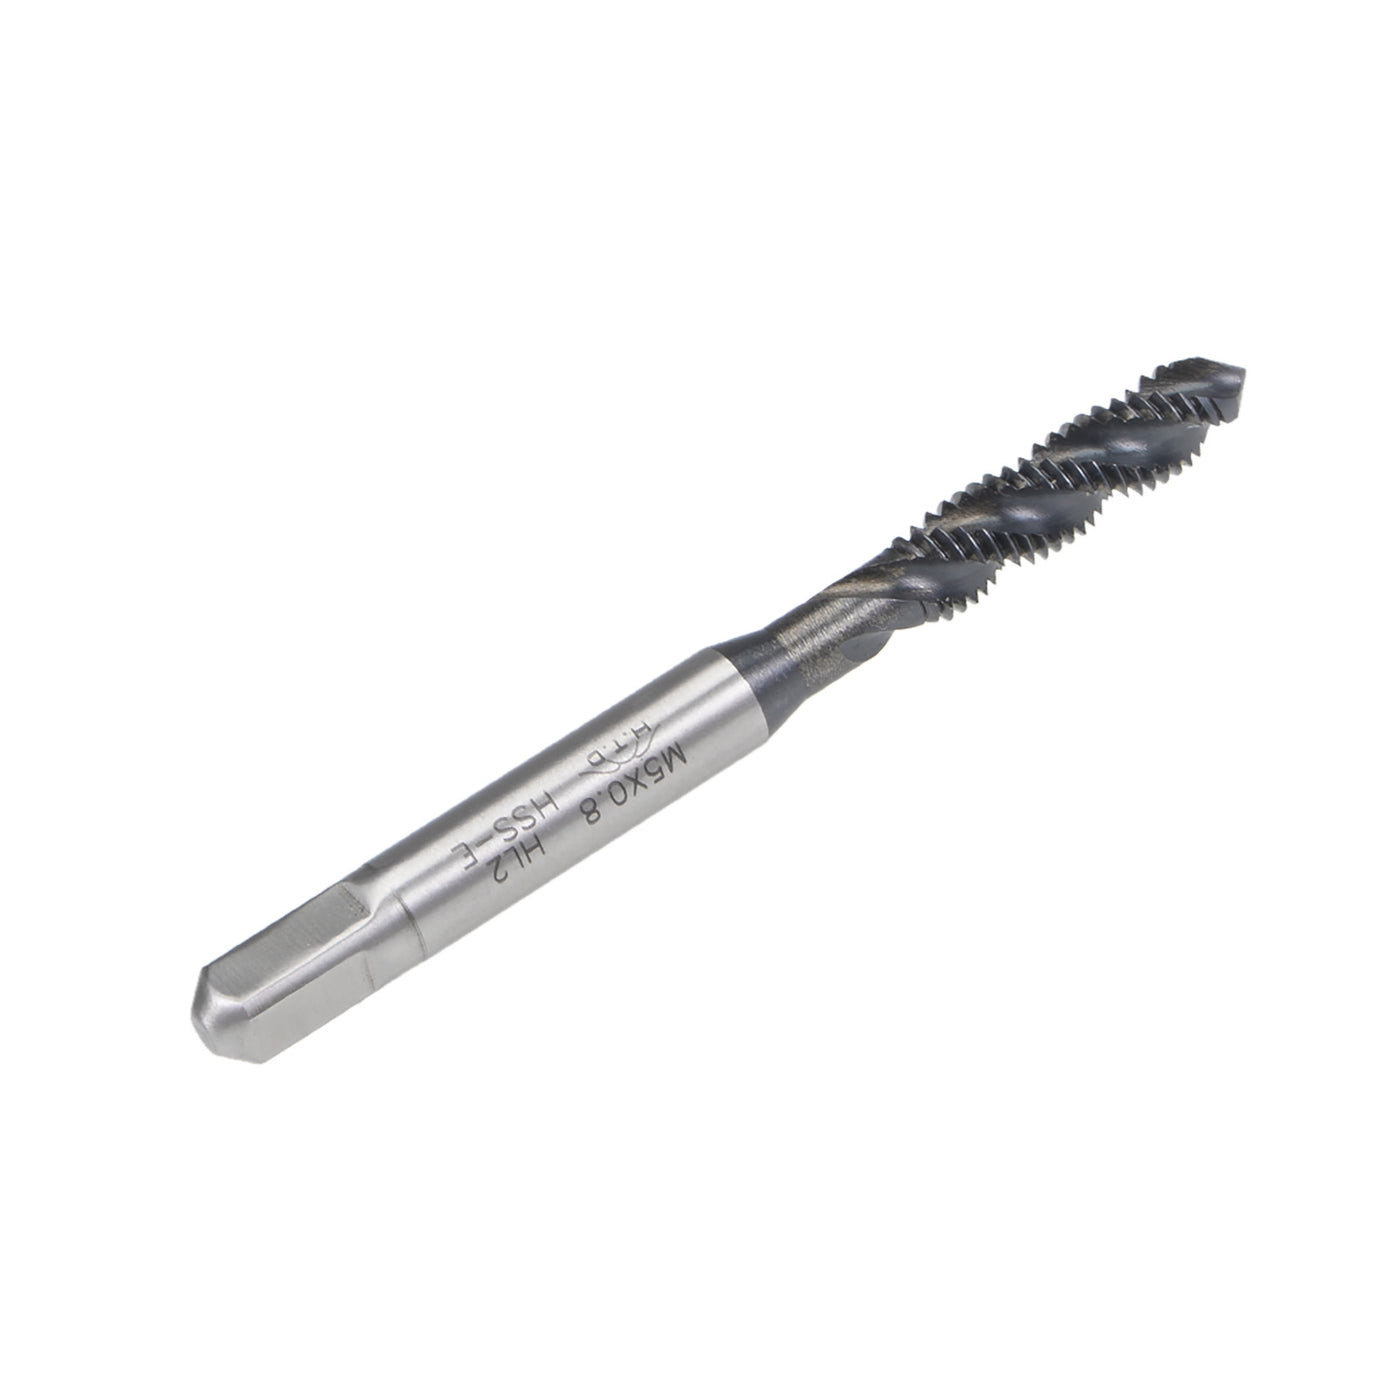 uxcell Uxcell M5 x 0.8 Spiral Flute Tap Metric Machine Thread Tap HSS Nitriding Coated 2pcs